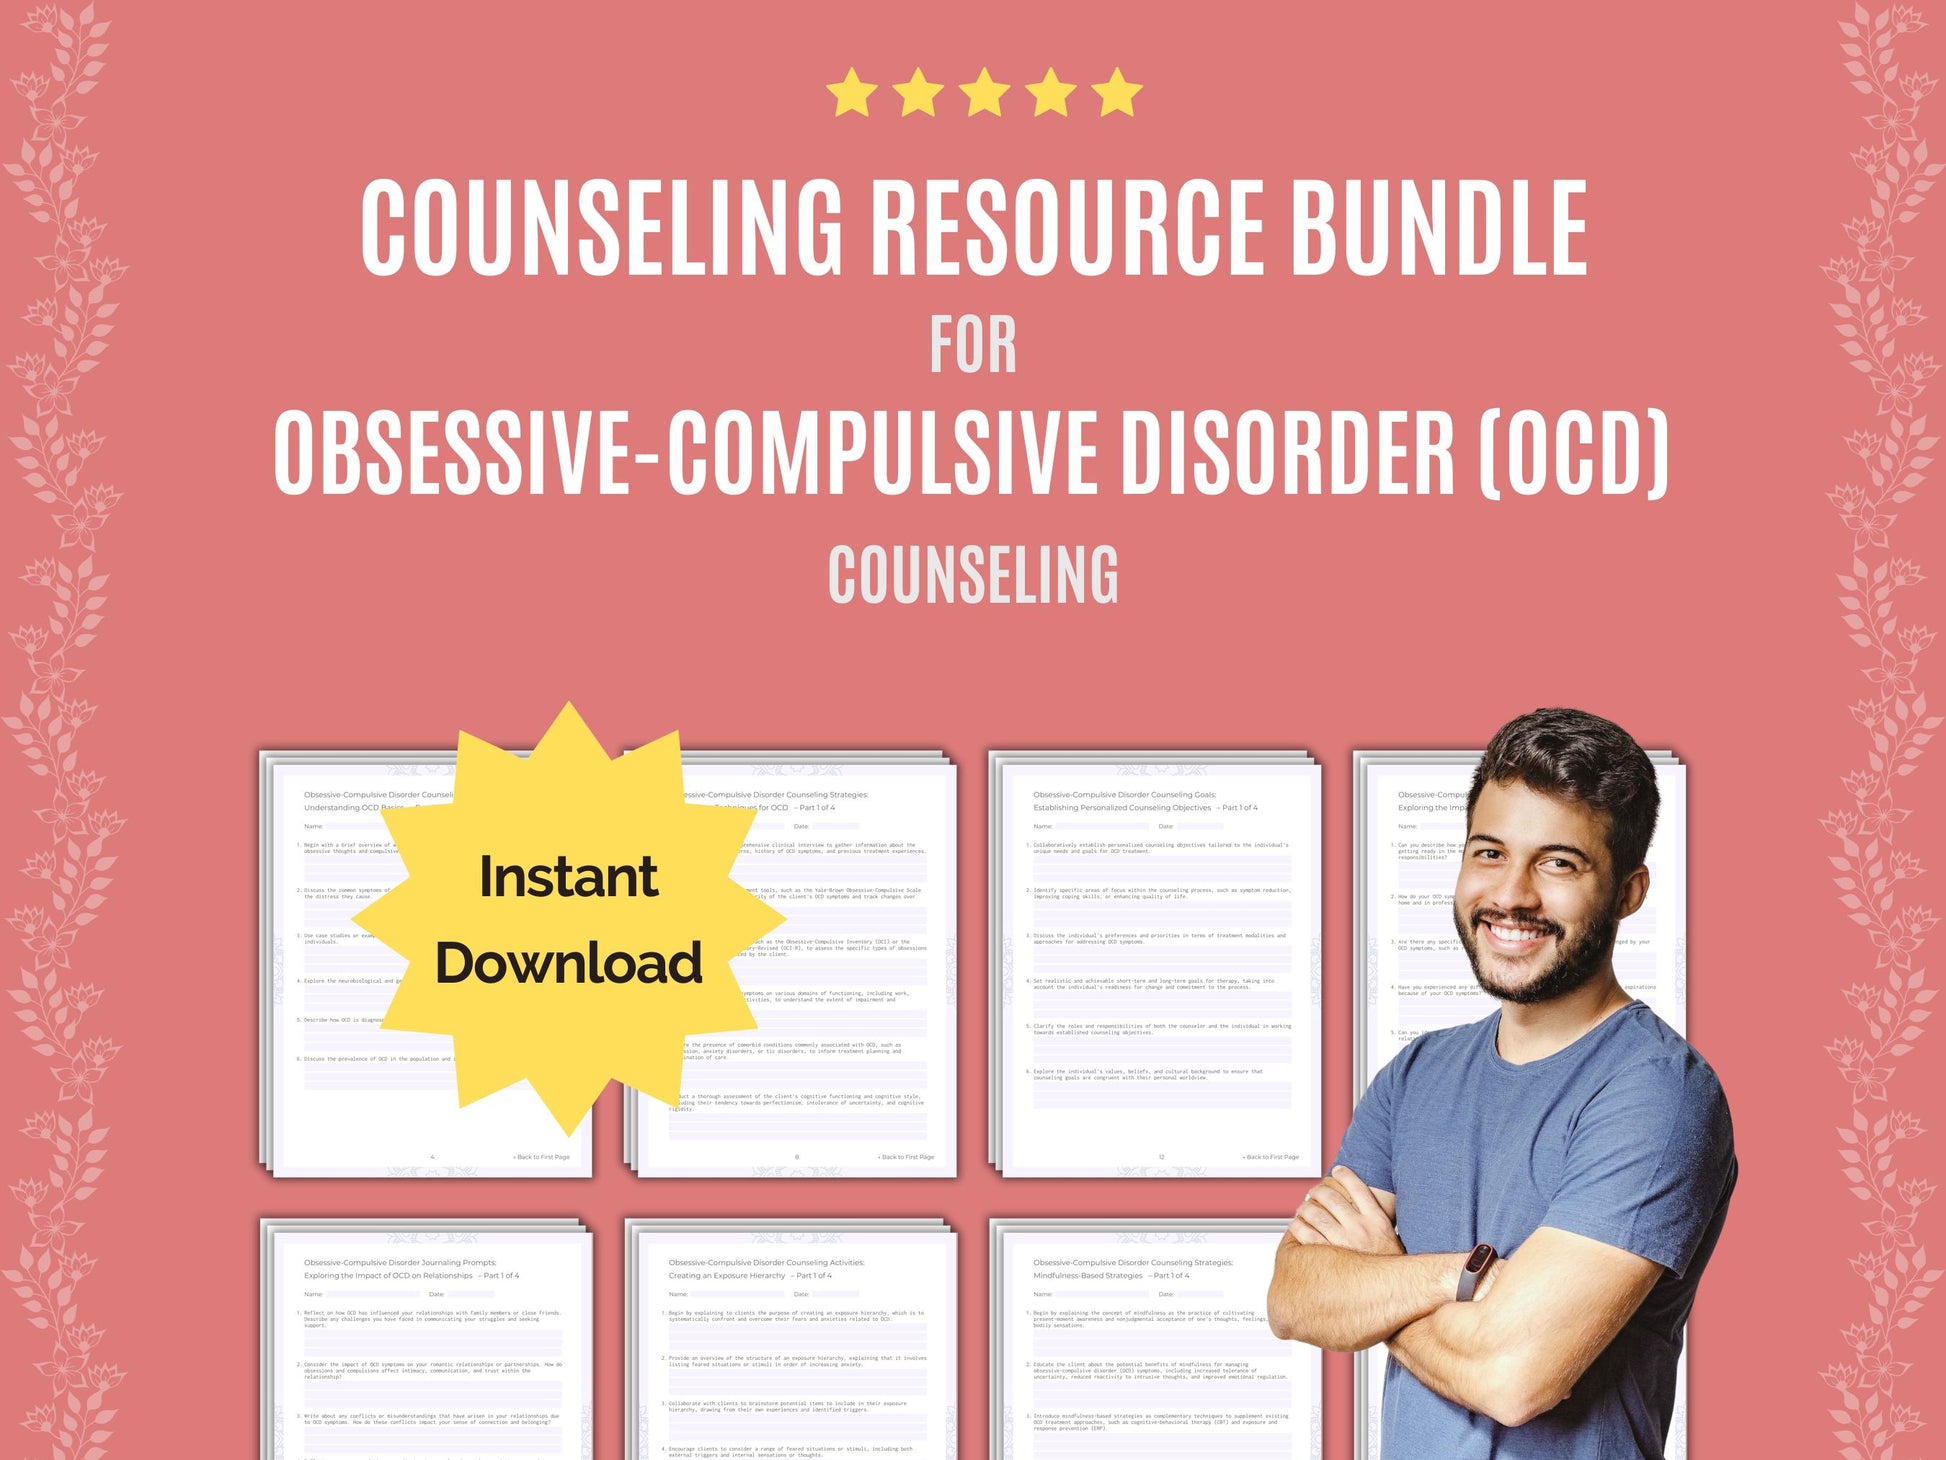 OCD Workbook, Mental Health, Compulsive, OCD Resource, OCD Bundle, OCD Therapy, OCD Template, Counselor, OCD Counseling, Therapist, Disorder, OCD Worksheet, Obsessive